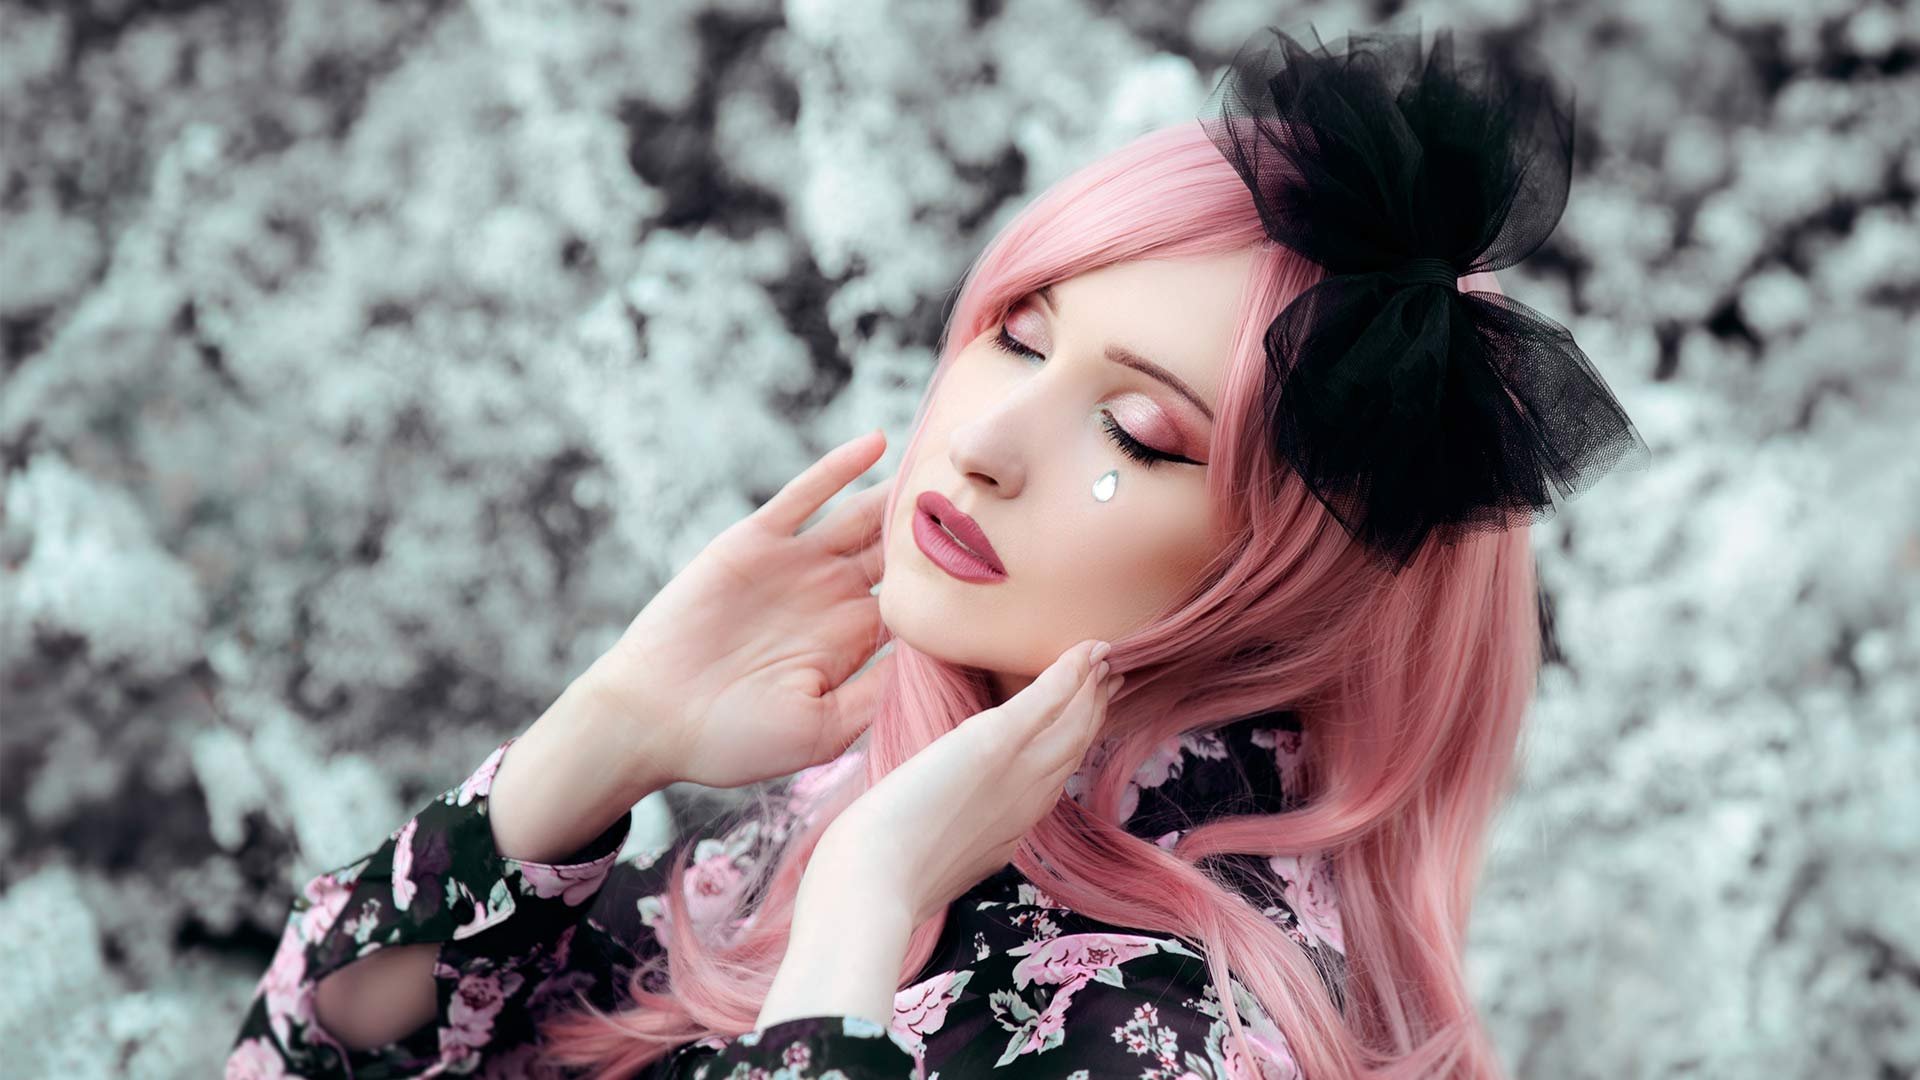 How To Be A Pastel Goth Girl: Makeup - Cosmique Studio - Aesthetic